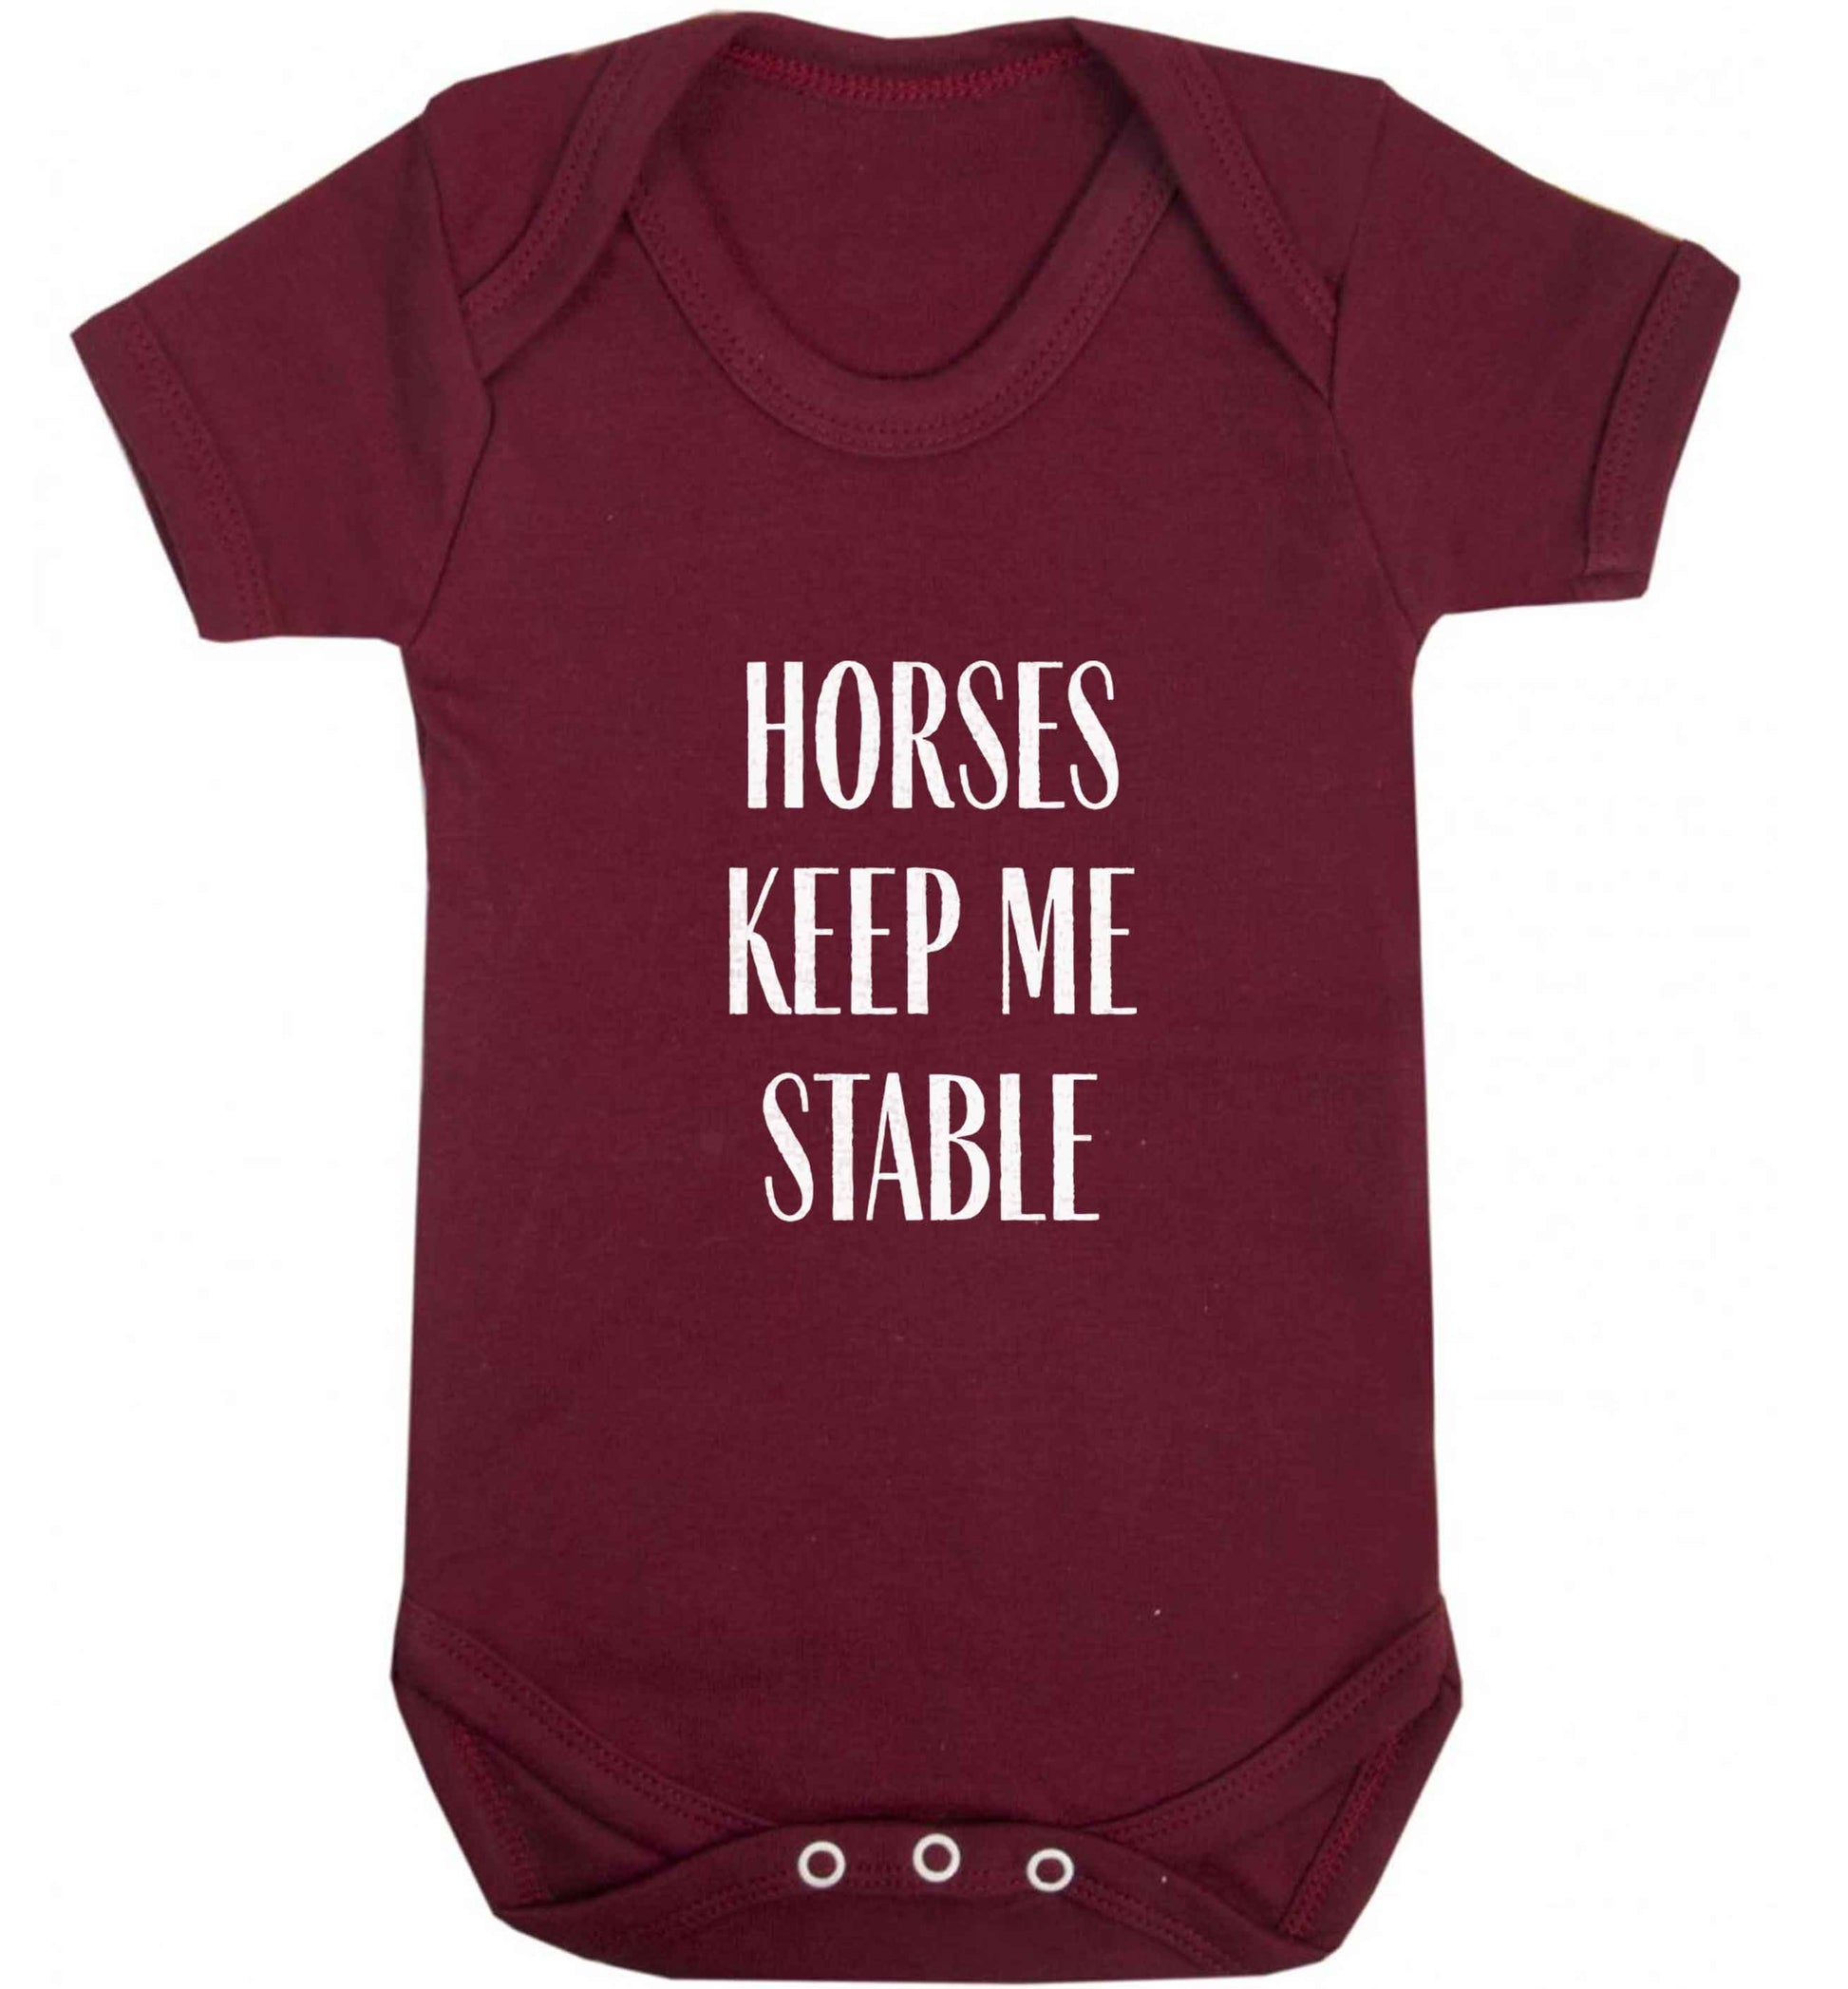 Horses keep me stable baby vest maroon 18-24 months